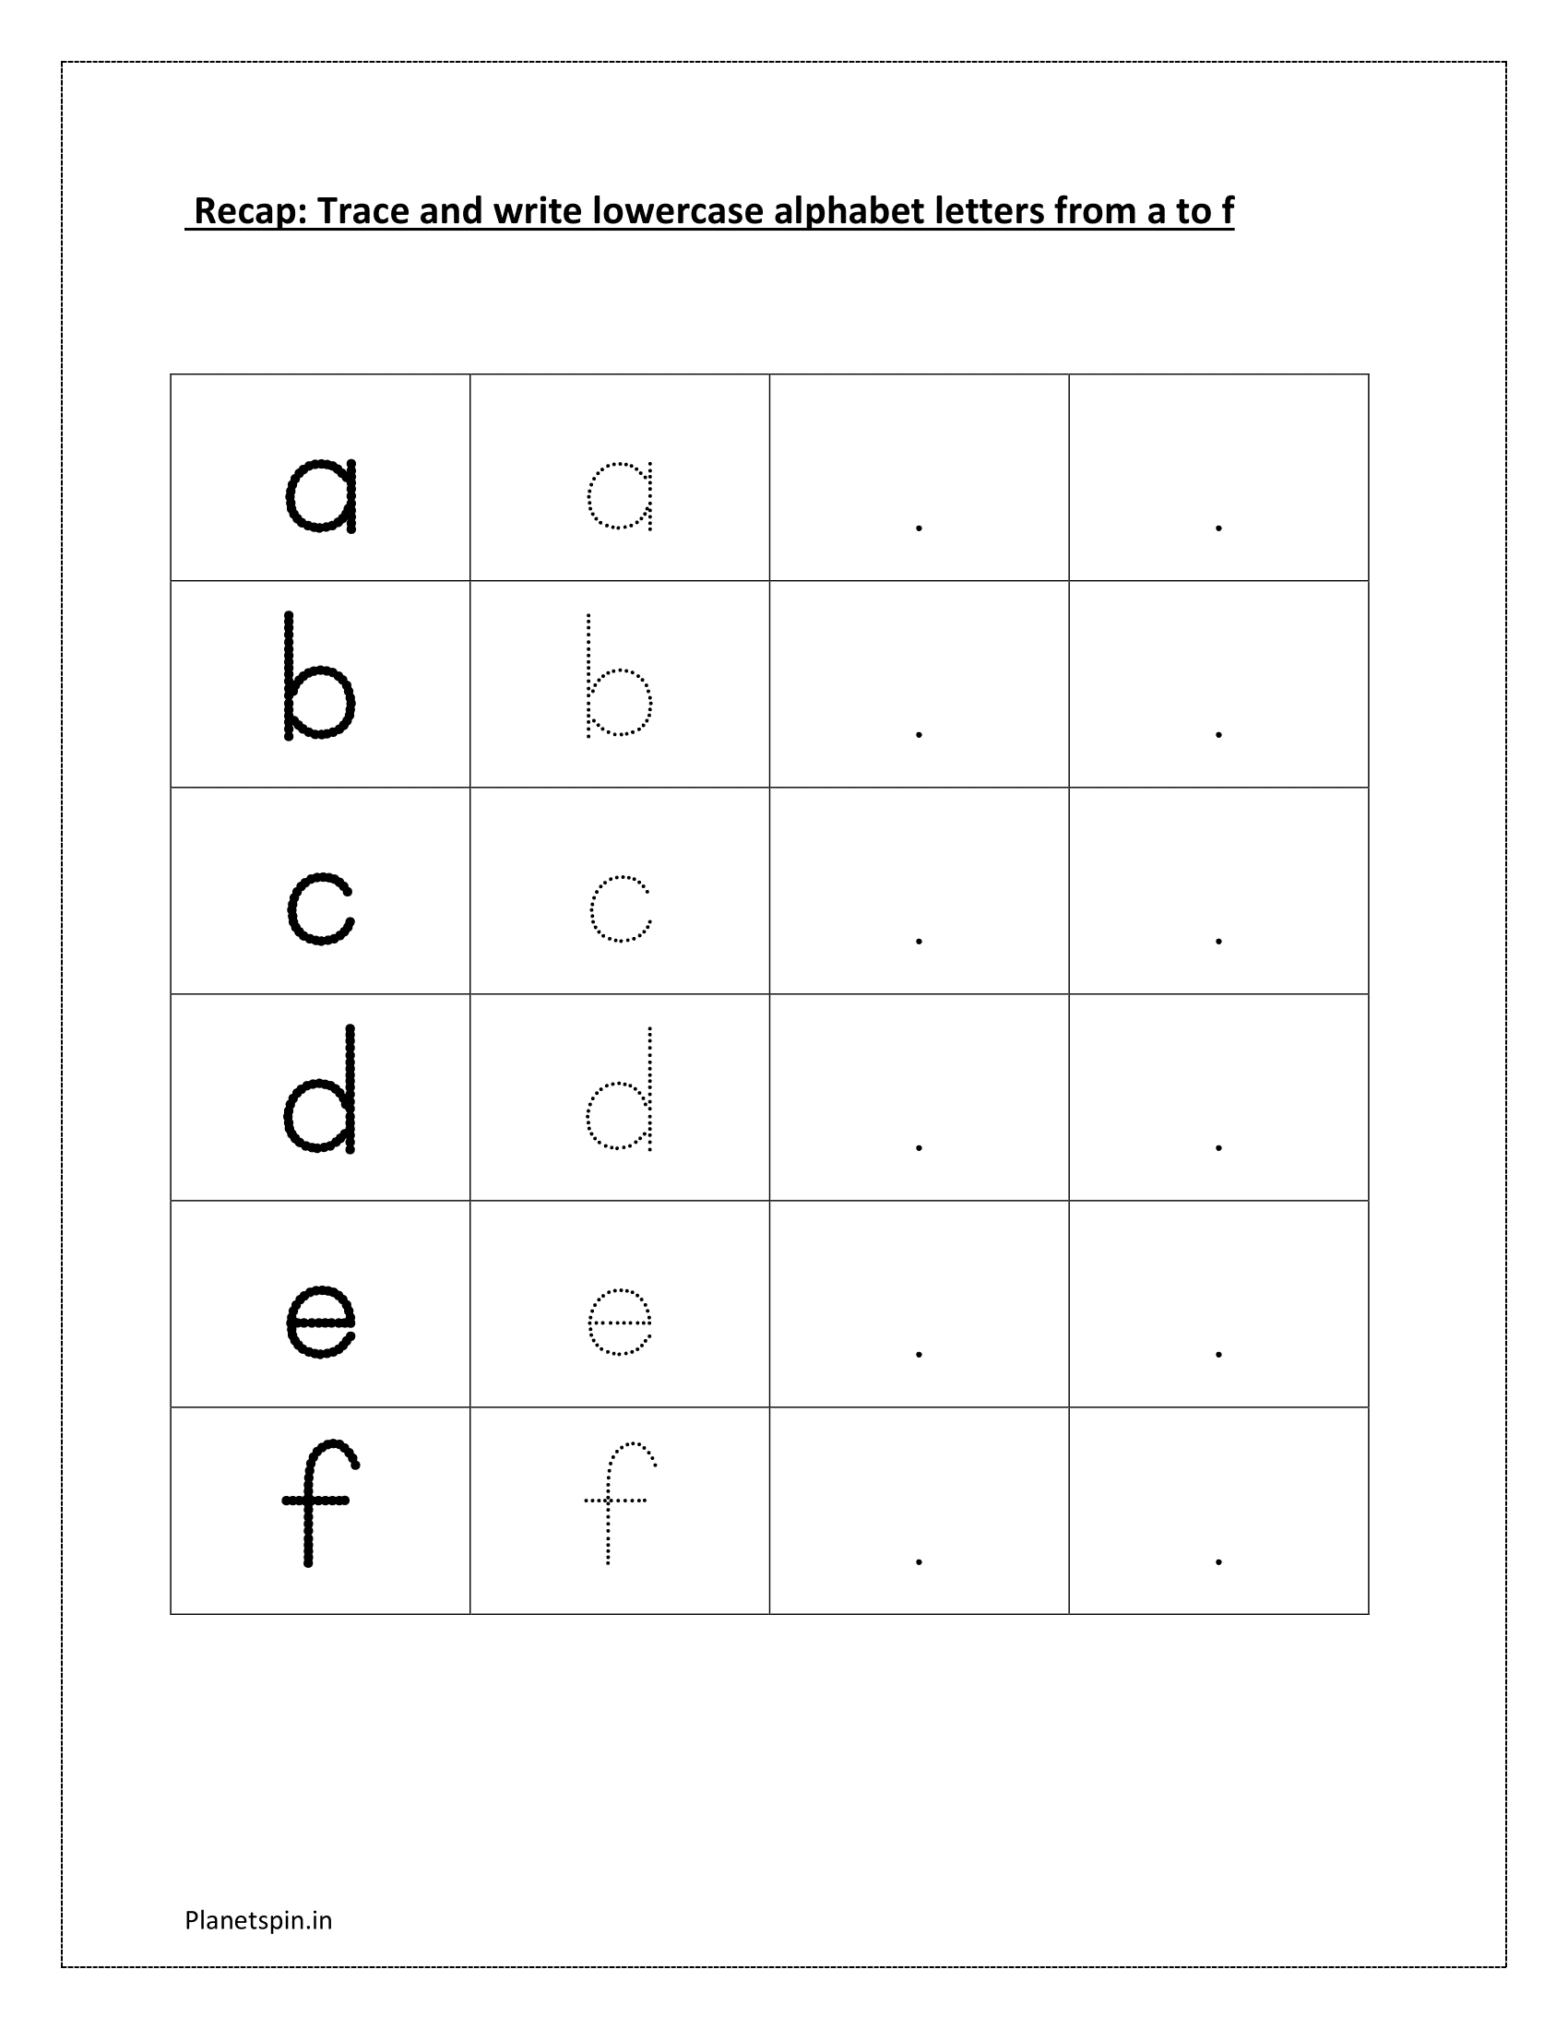 Writing lowercase letters worksheets | Planetspin.in